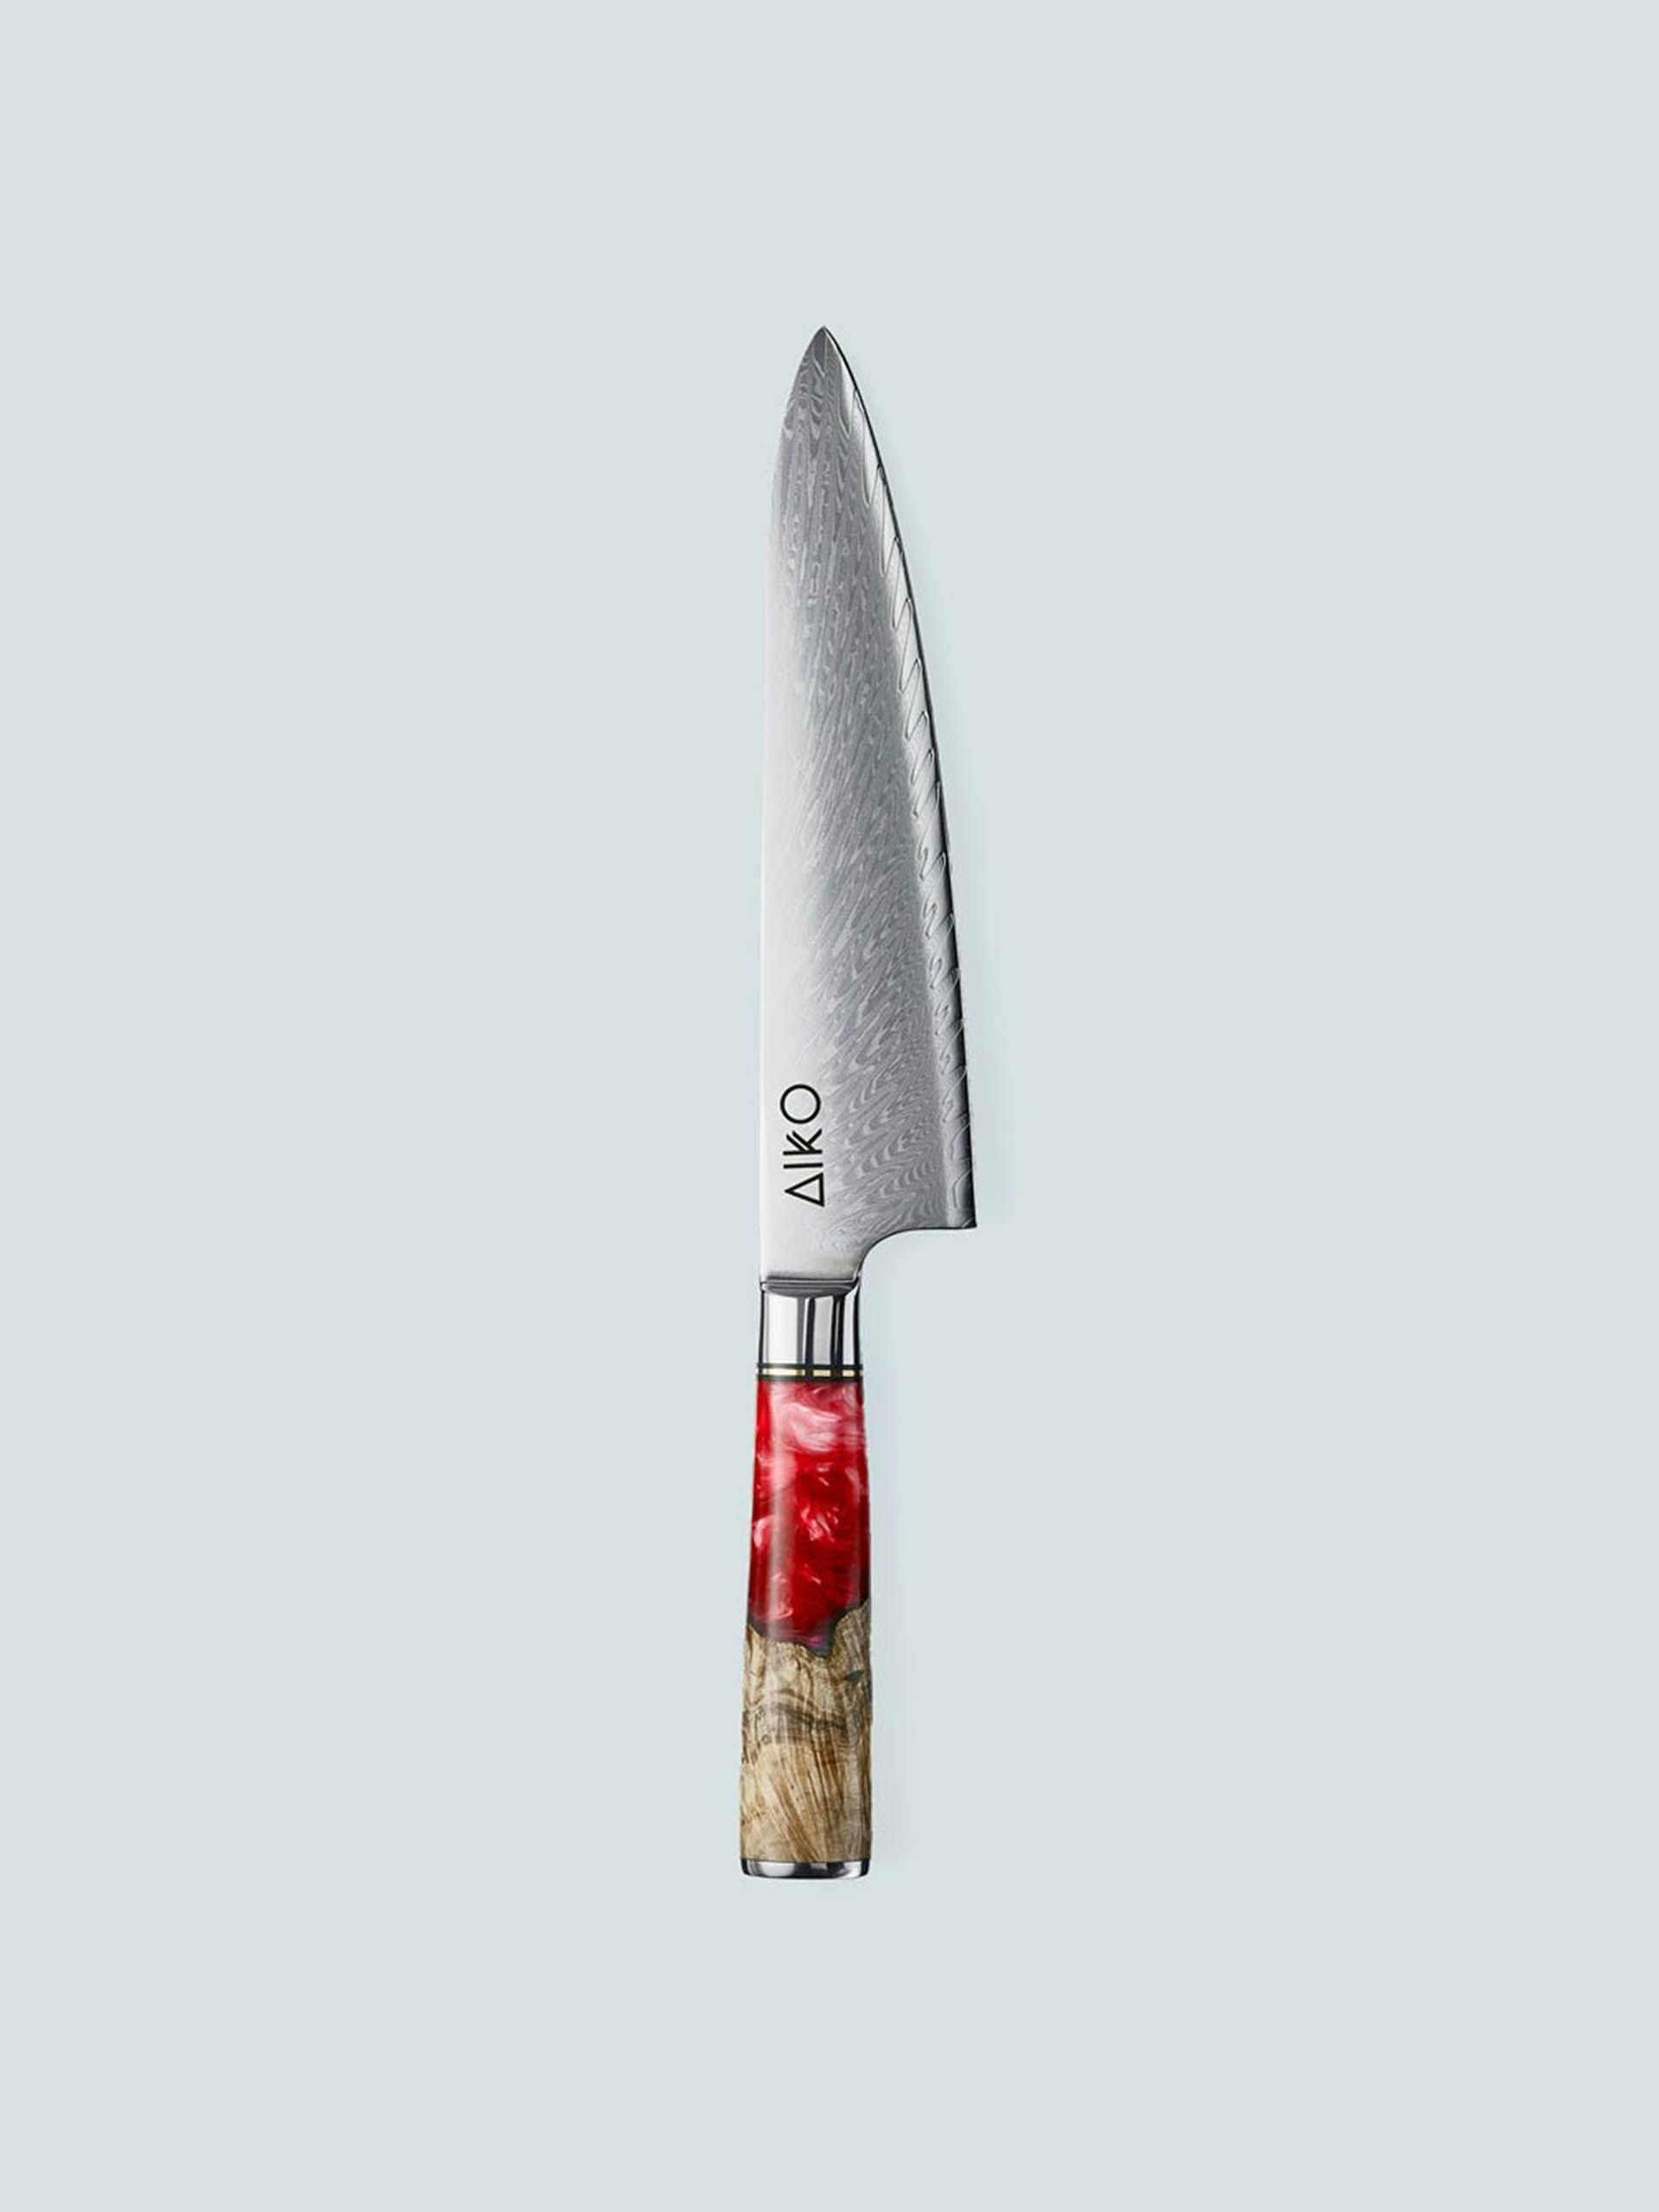 Steel knife with red handle